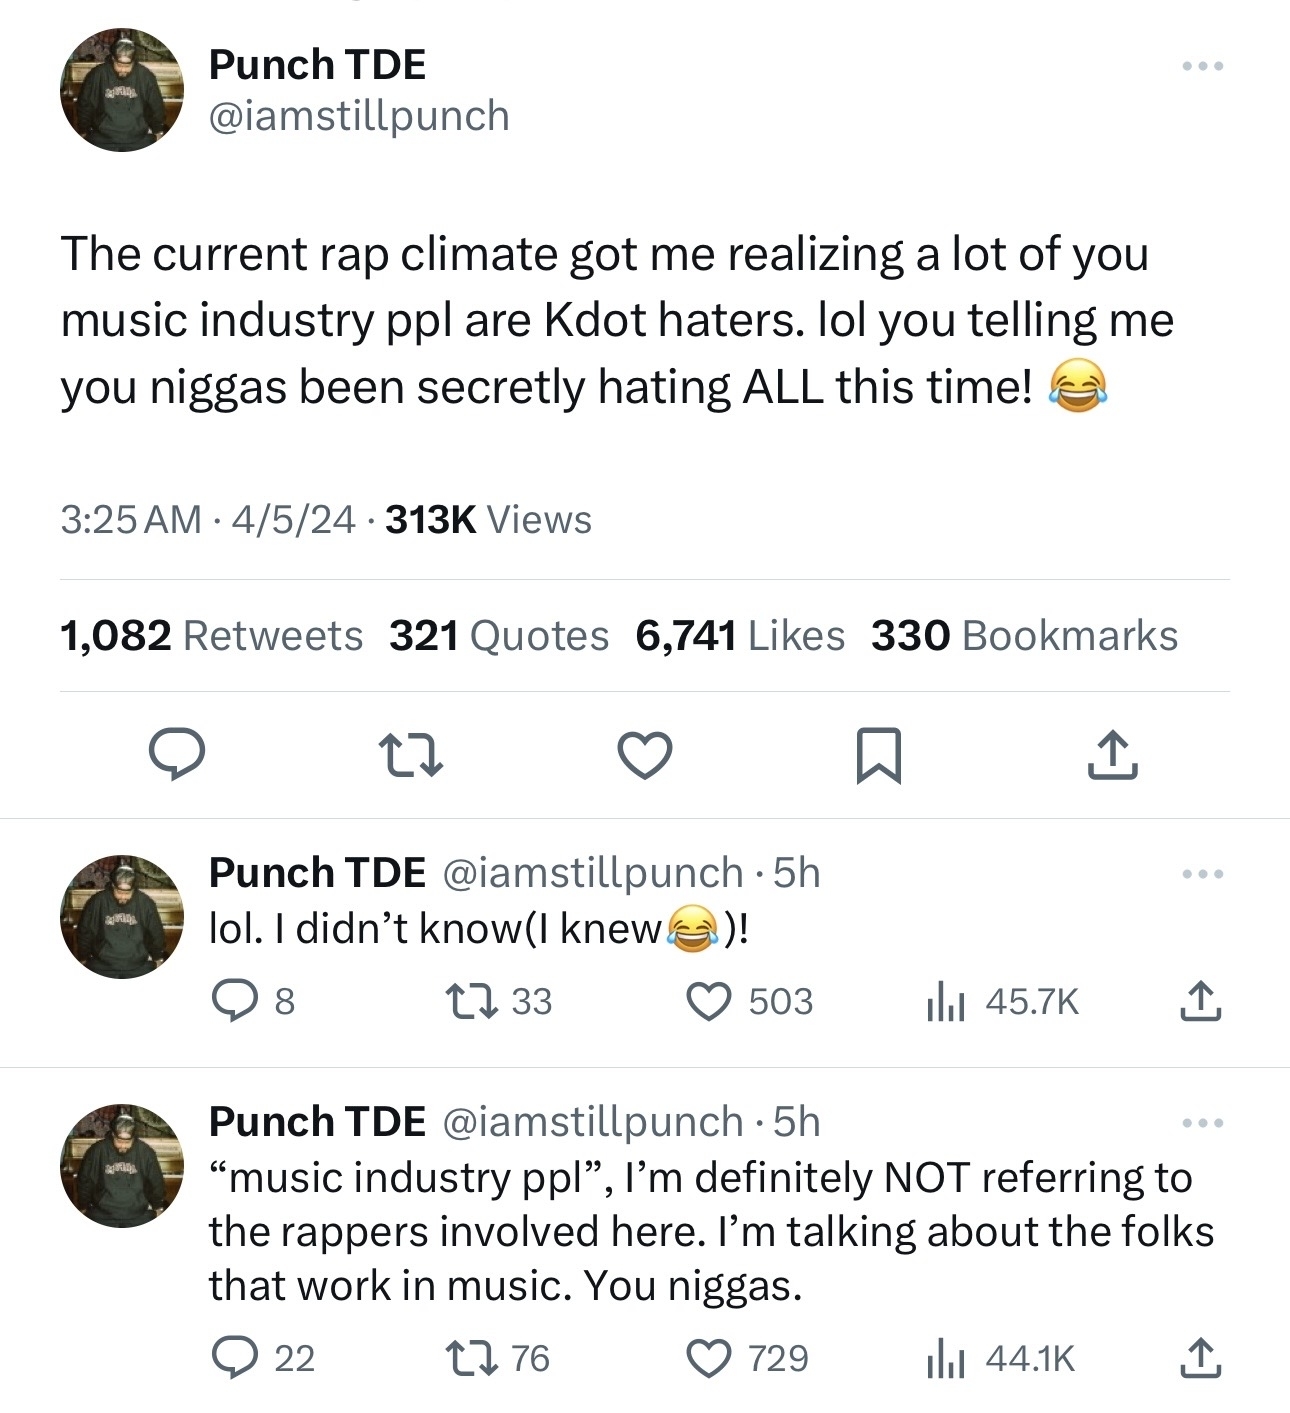 Summarized tweets discussing the music industry and reactions from Punch TDE, with mixed opinions and humor